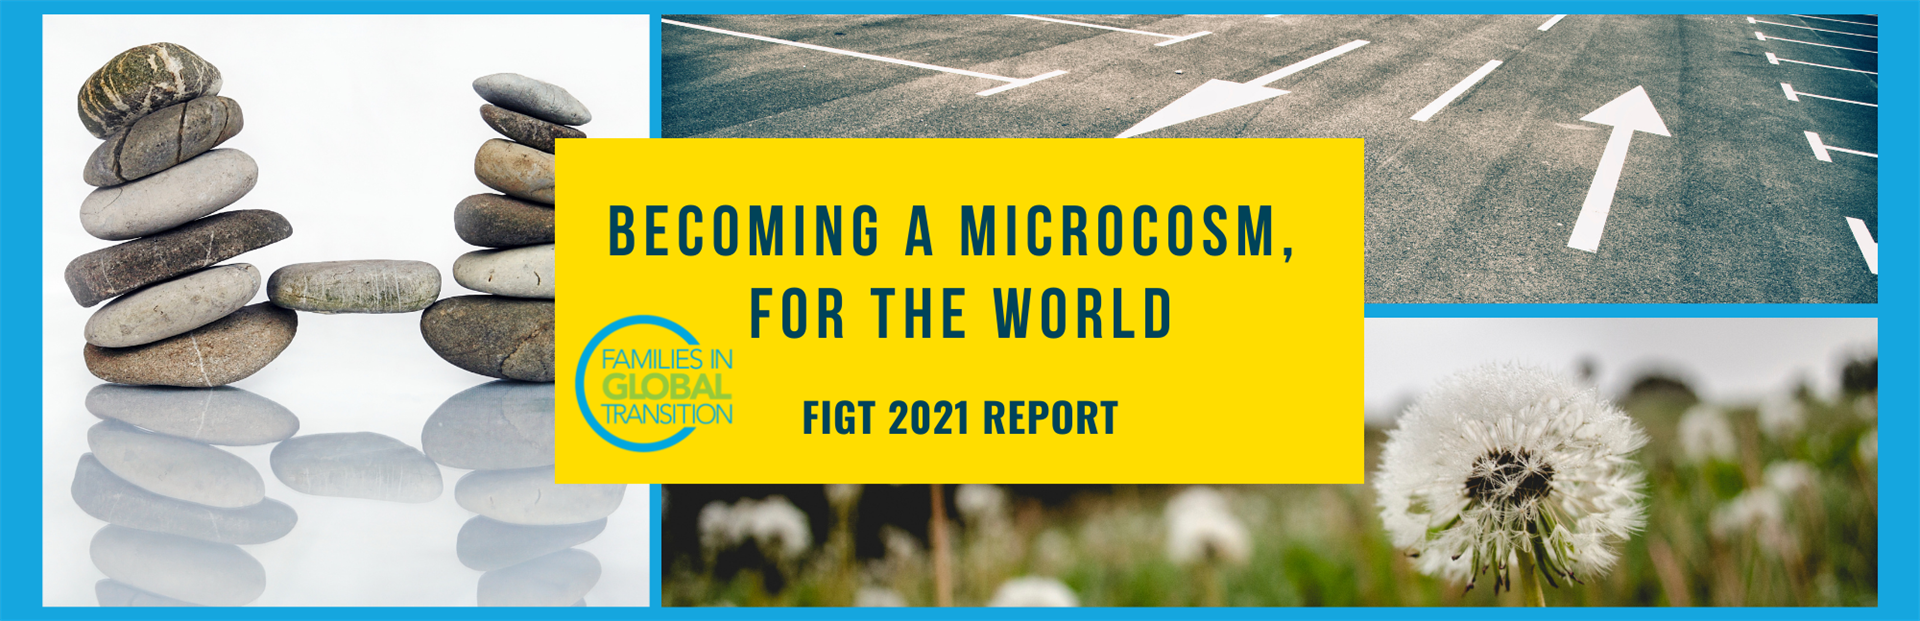 FIGT 2021 Report, Becoming a Microcosm of the World, for the World: Reflecting on FIGT2021